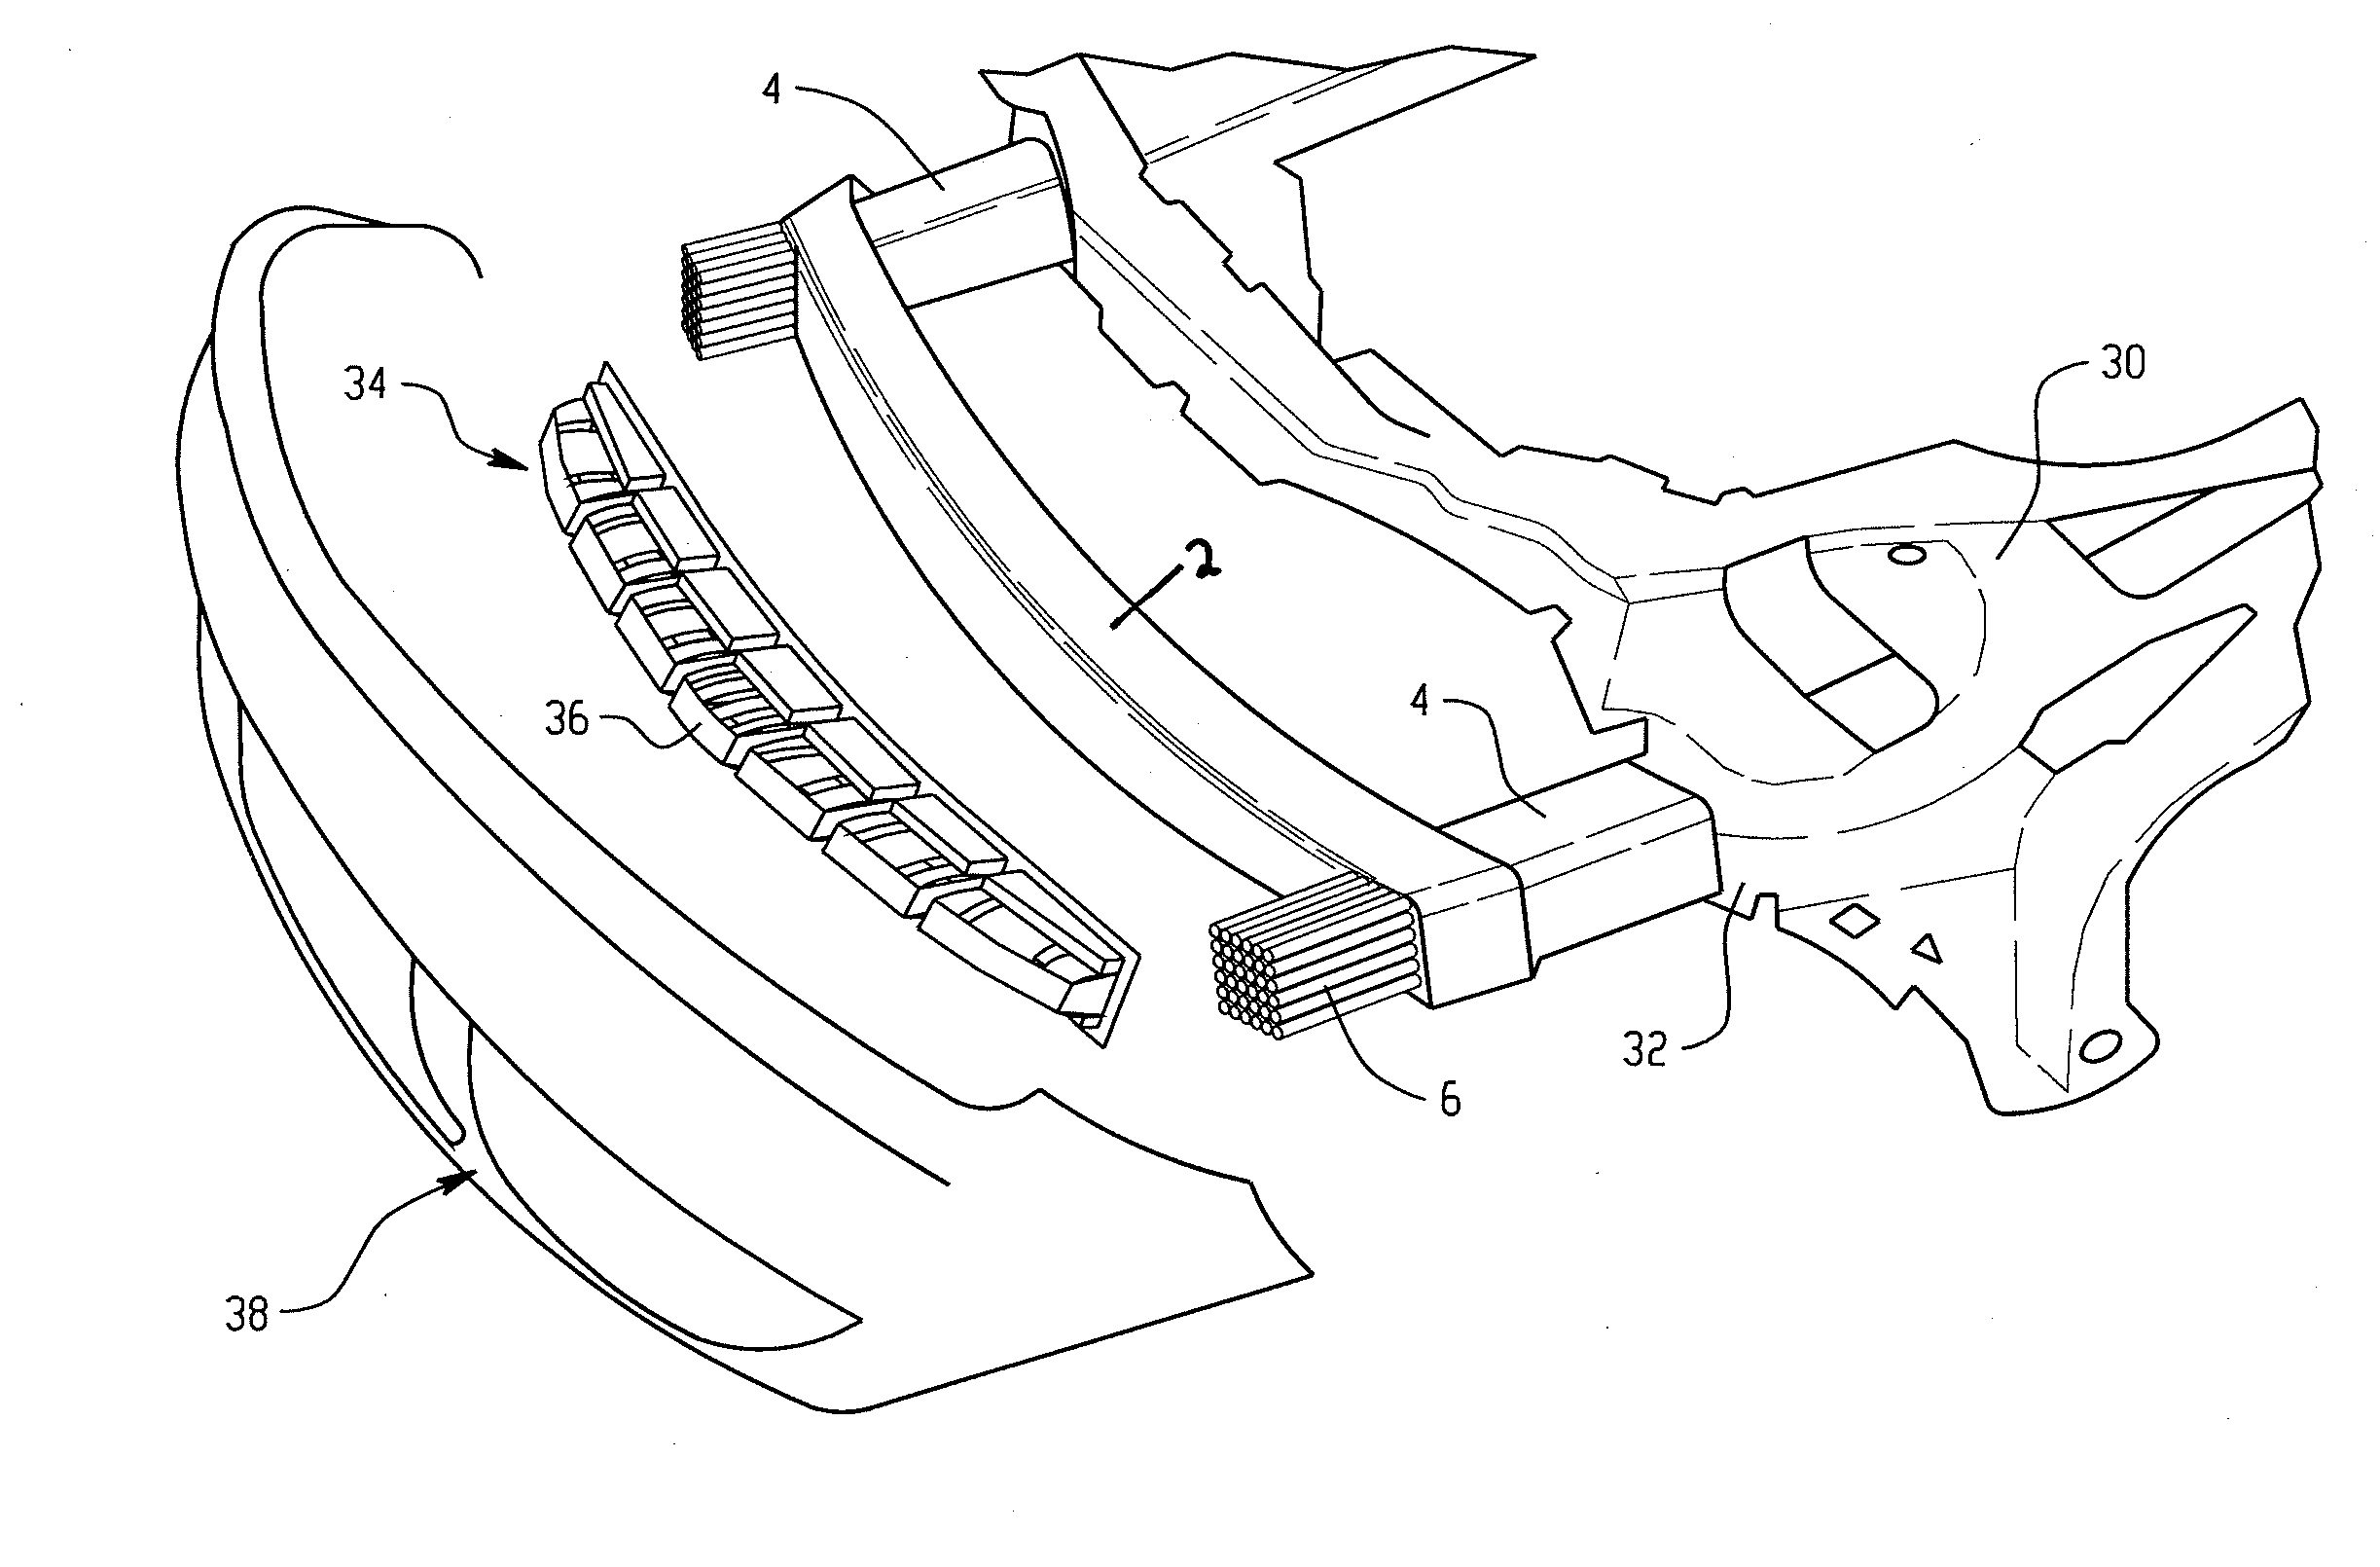 Polymer, energy absorber rail extension, methods of making and vehicles using the same